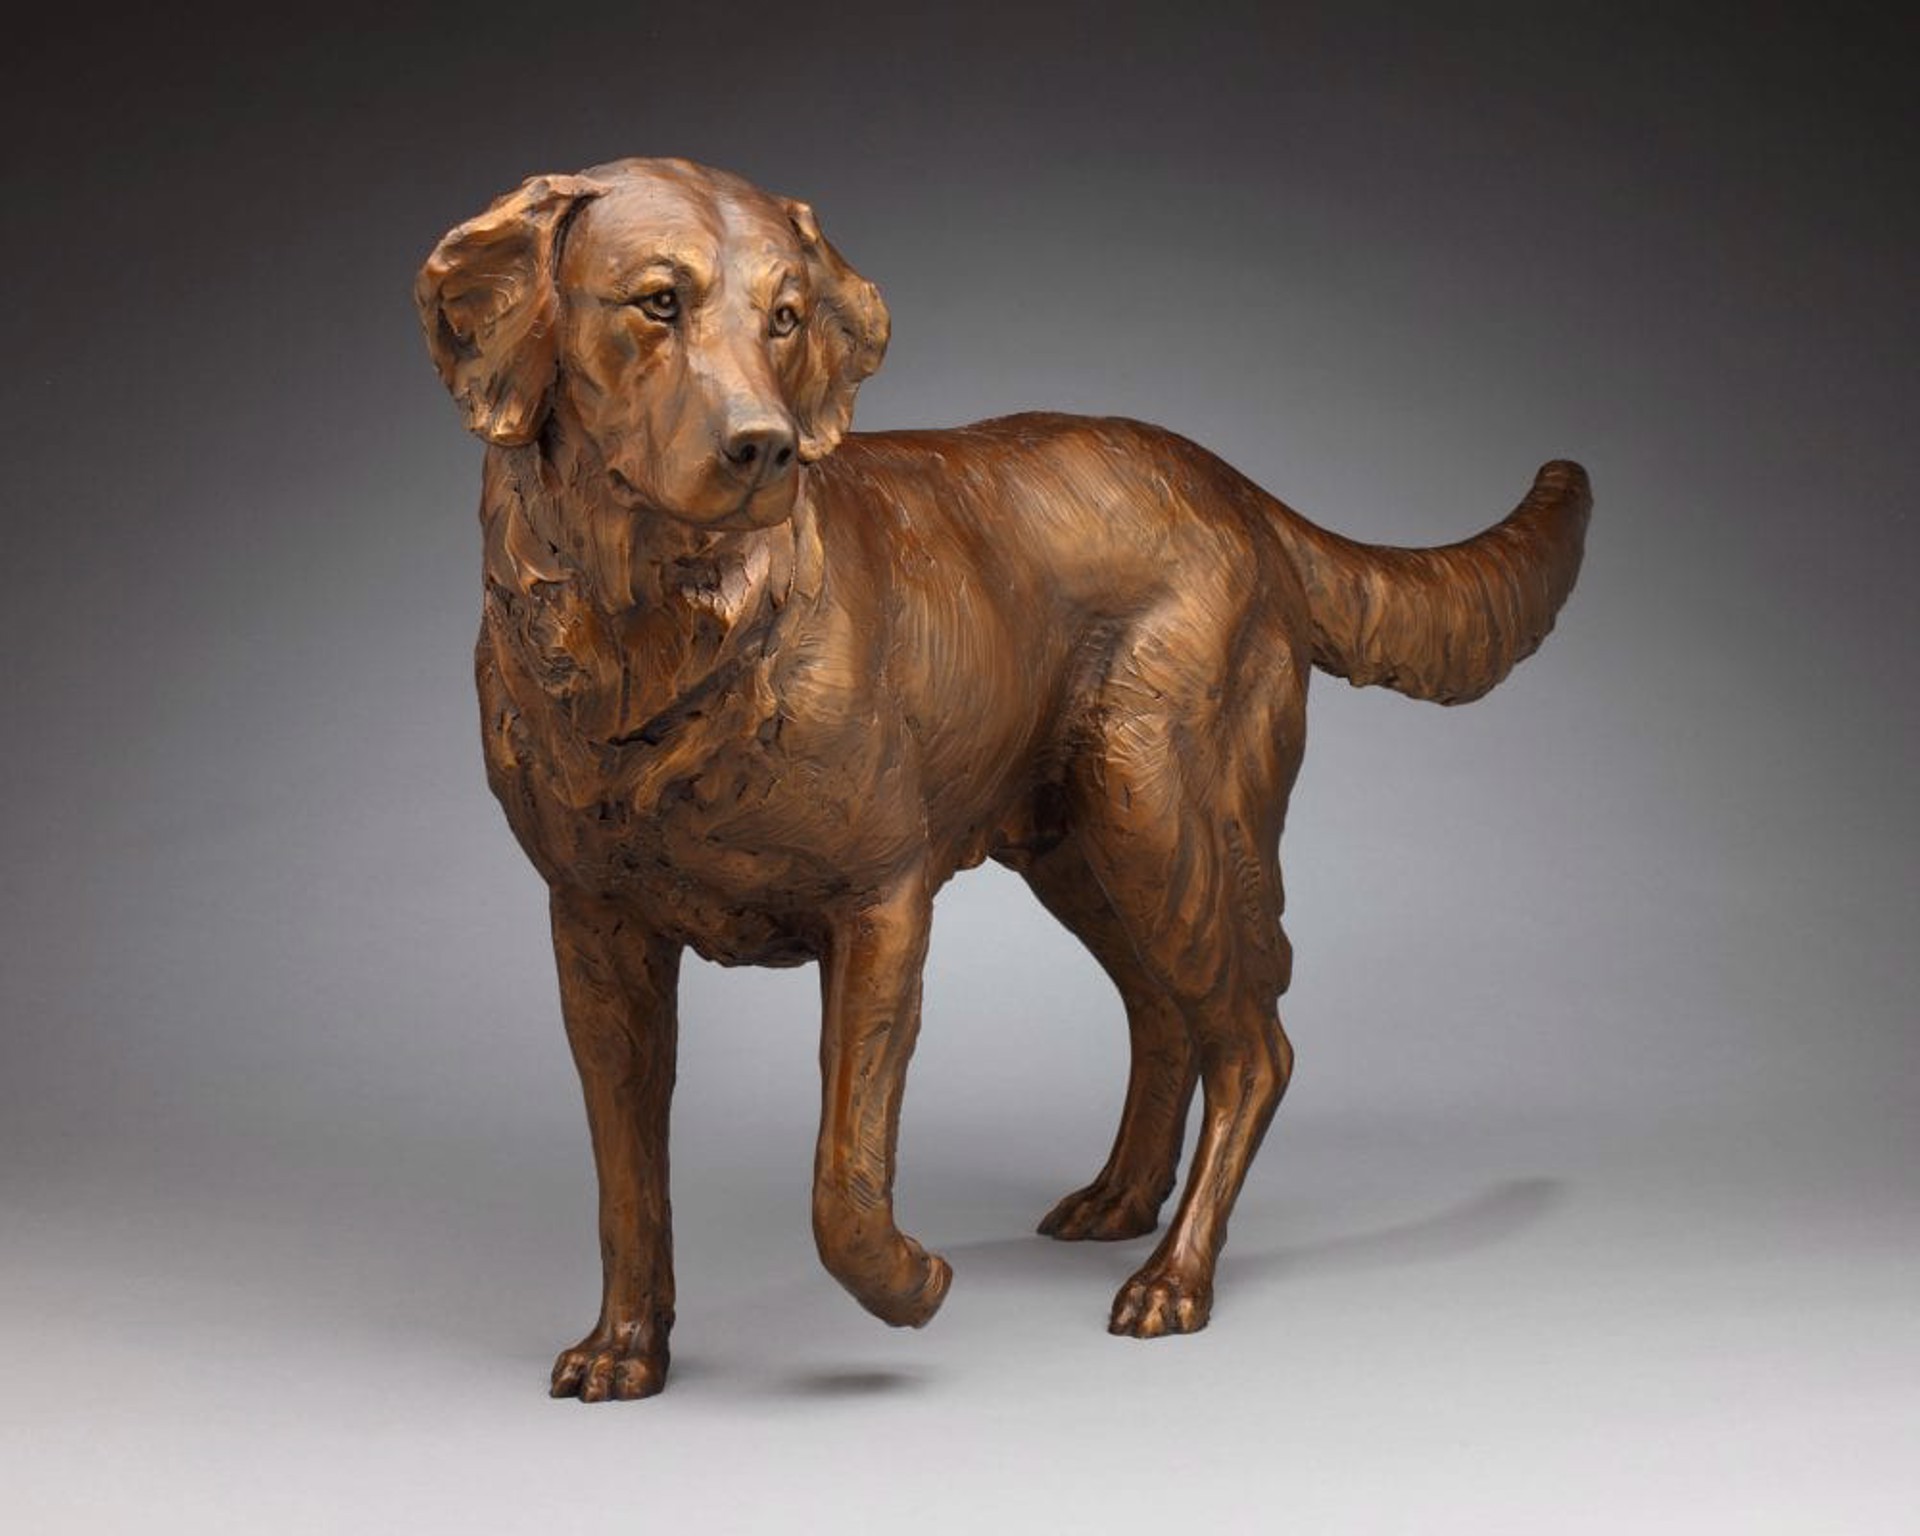 Up and Coming Golden Retriever by Daniel Glanz (sculptor)